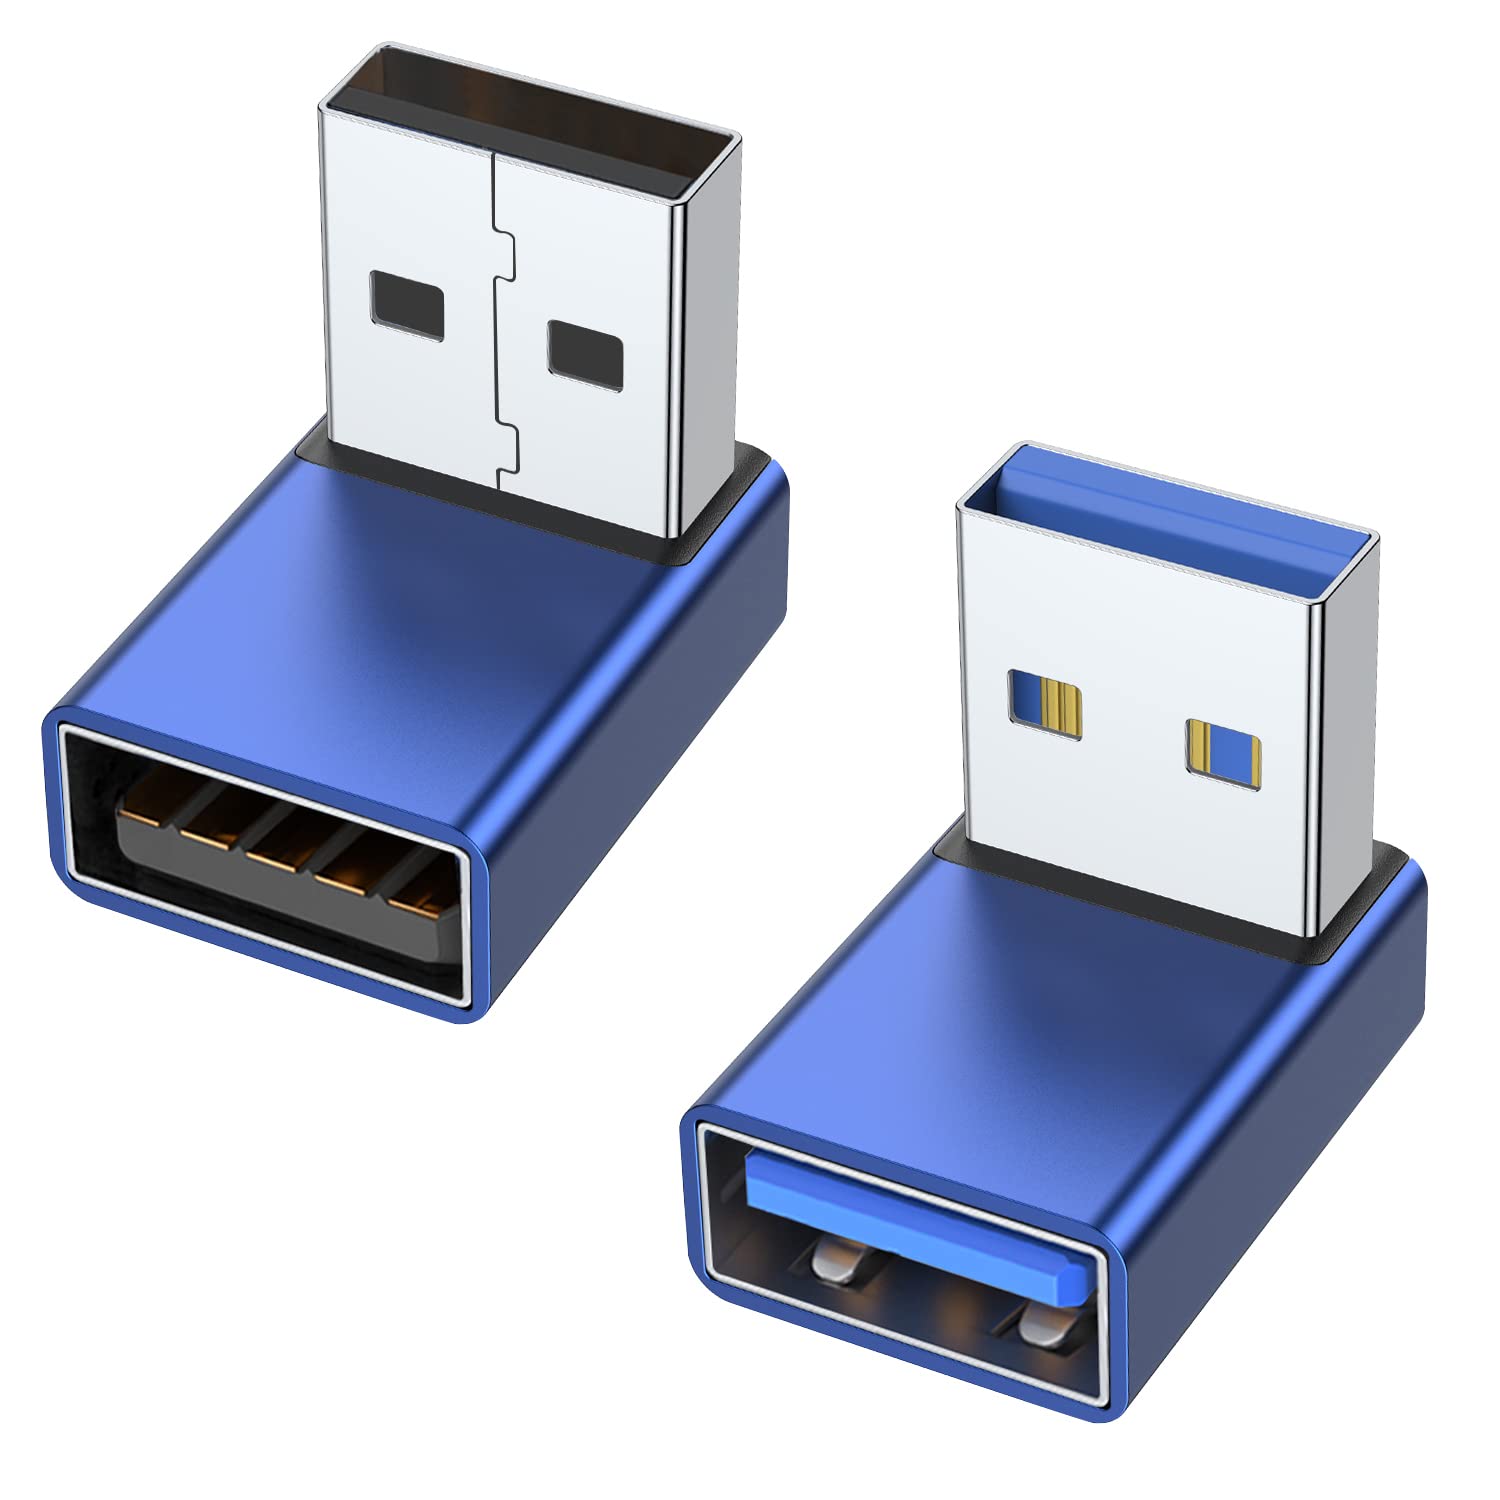 AreMe 90 Degree USB 3.0 Adapter 2 Pack, Up and Down Angle USB A Male to Female Converter Extender for PC, Laptop, USB A Charger, Power Bank and More (Blue)